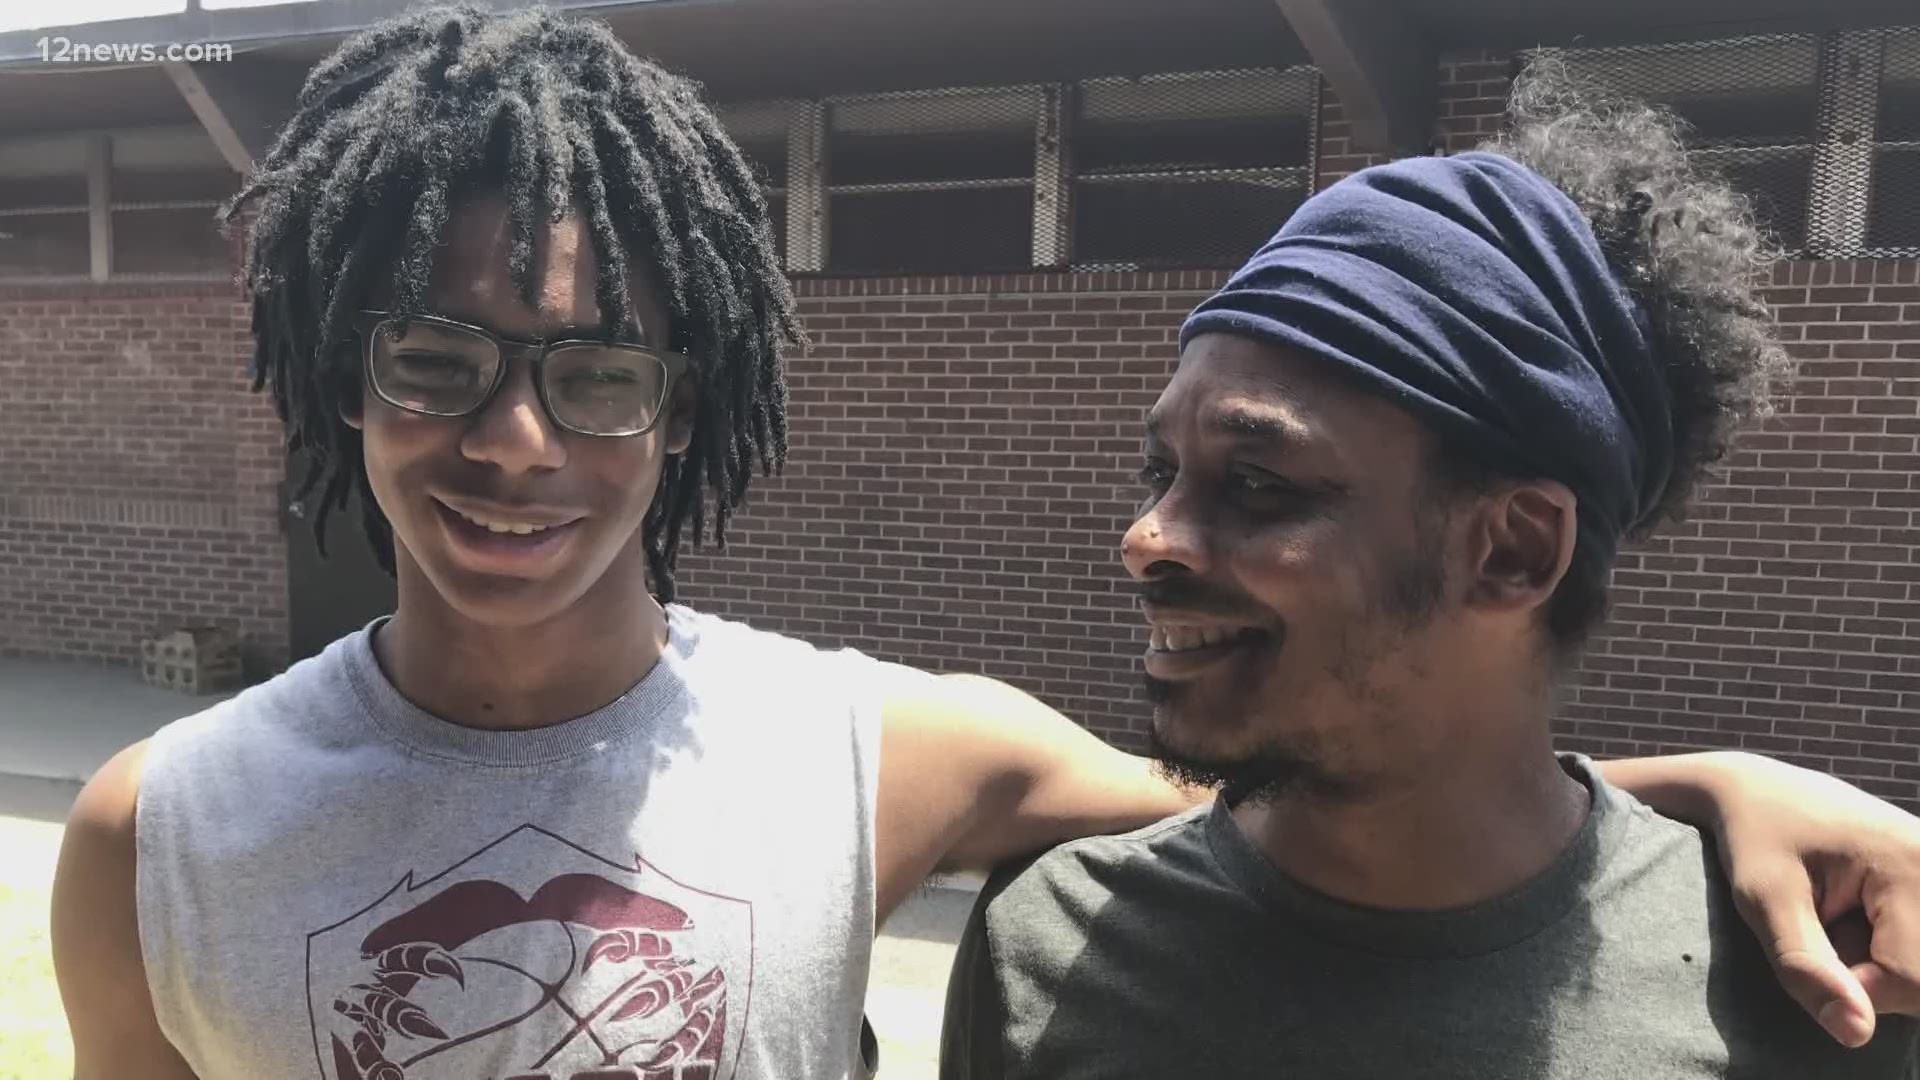 Arizonans are describing, in their own words, what it's like to be black in Arizona. A father opens up about his fears for his son growing up in Arizona.